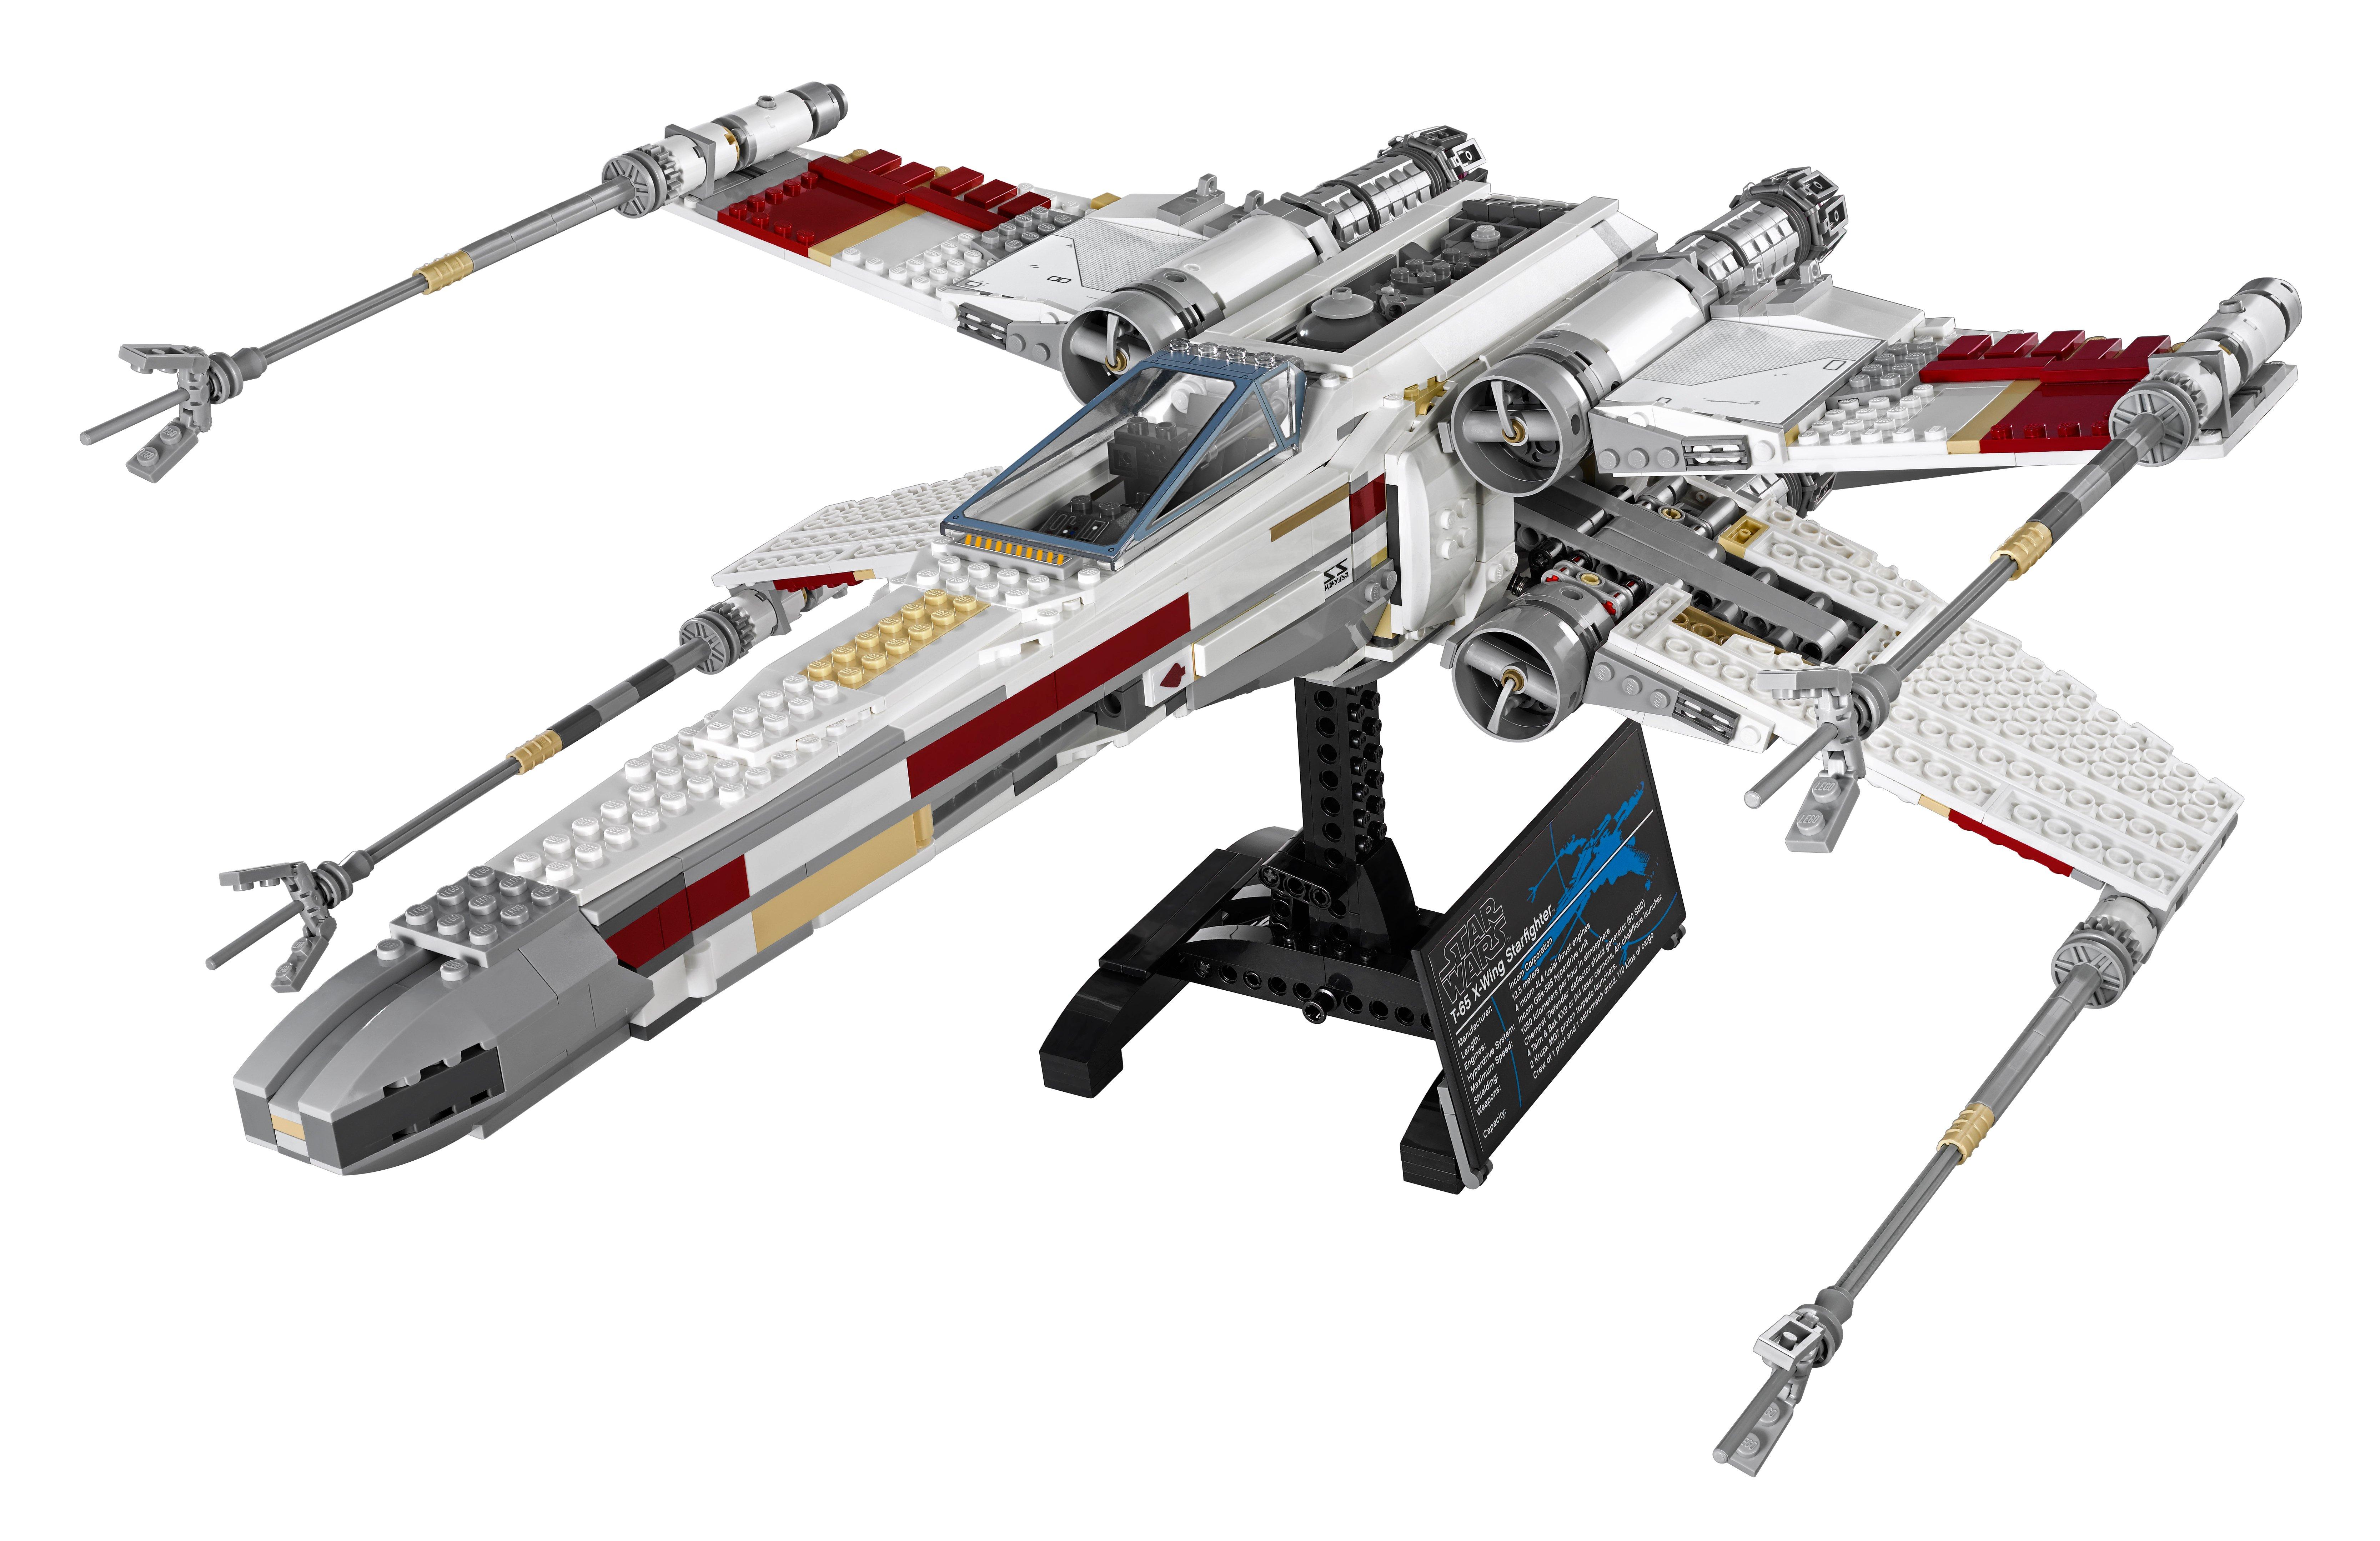 LEGO®  10240 Red Five X-wing Starfighter™ 